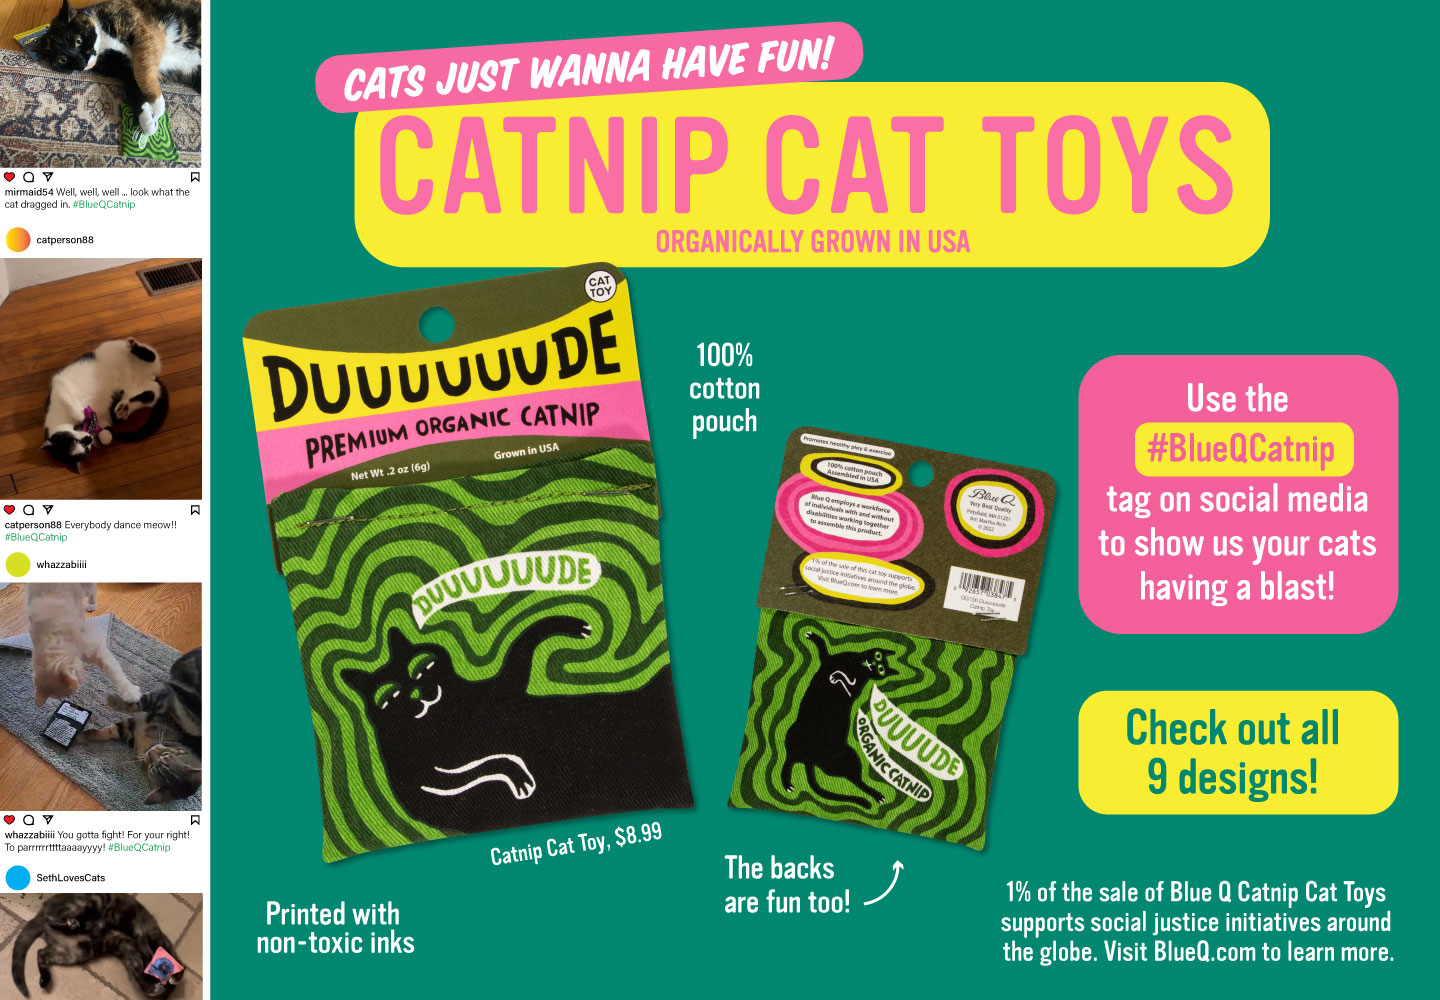 Cats just wanna have fun! Blue Q Catnip Cat Toys do the trick!